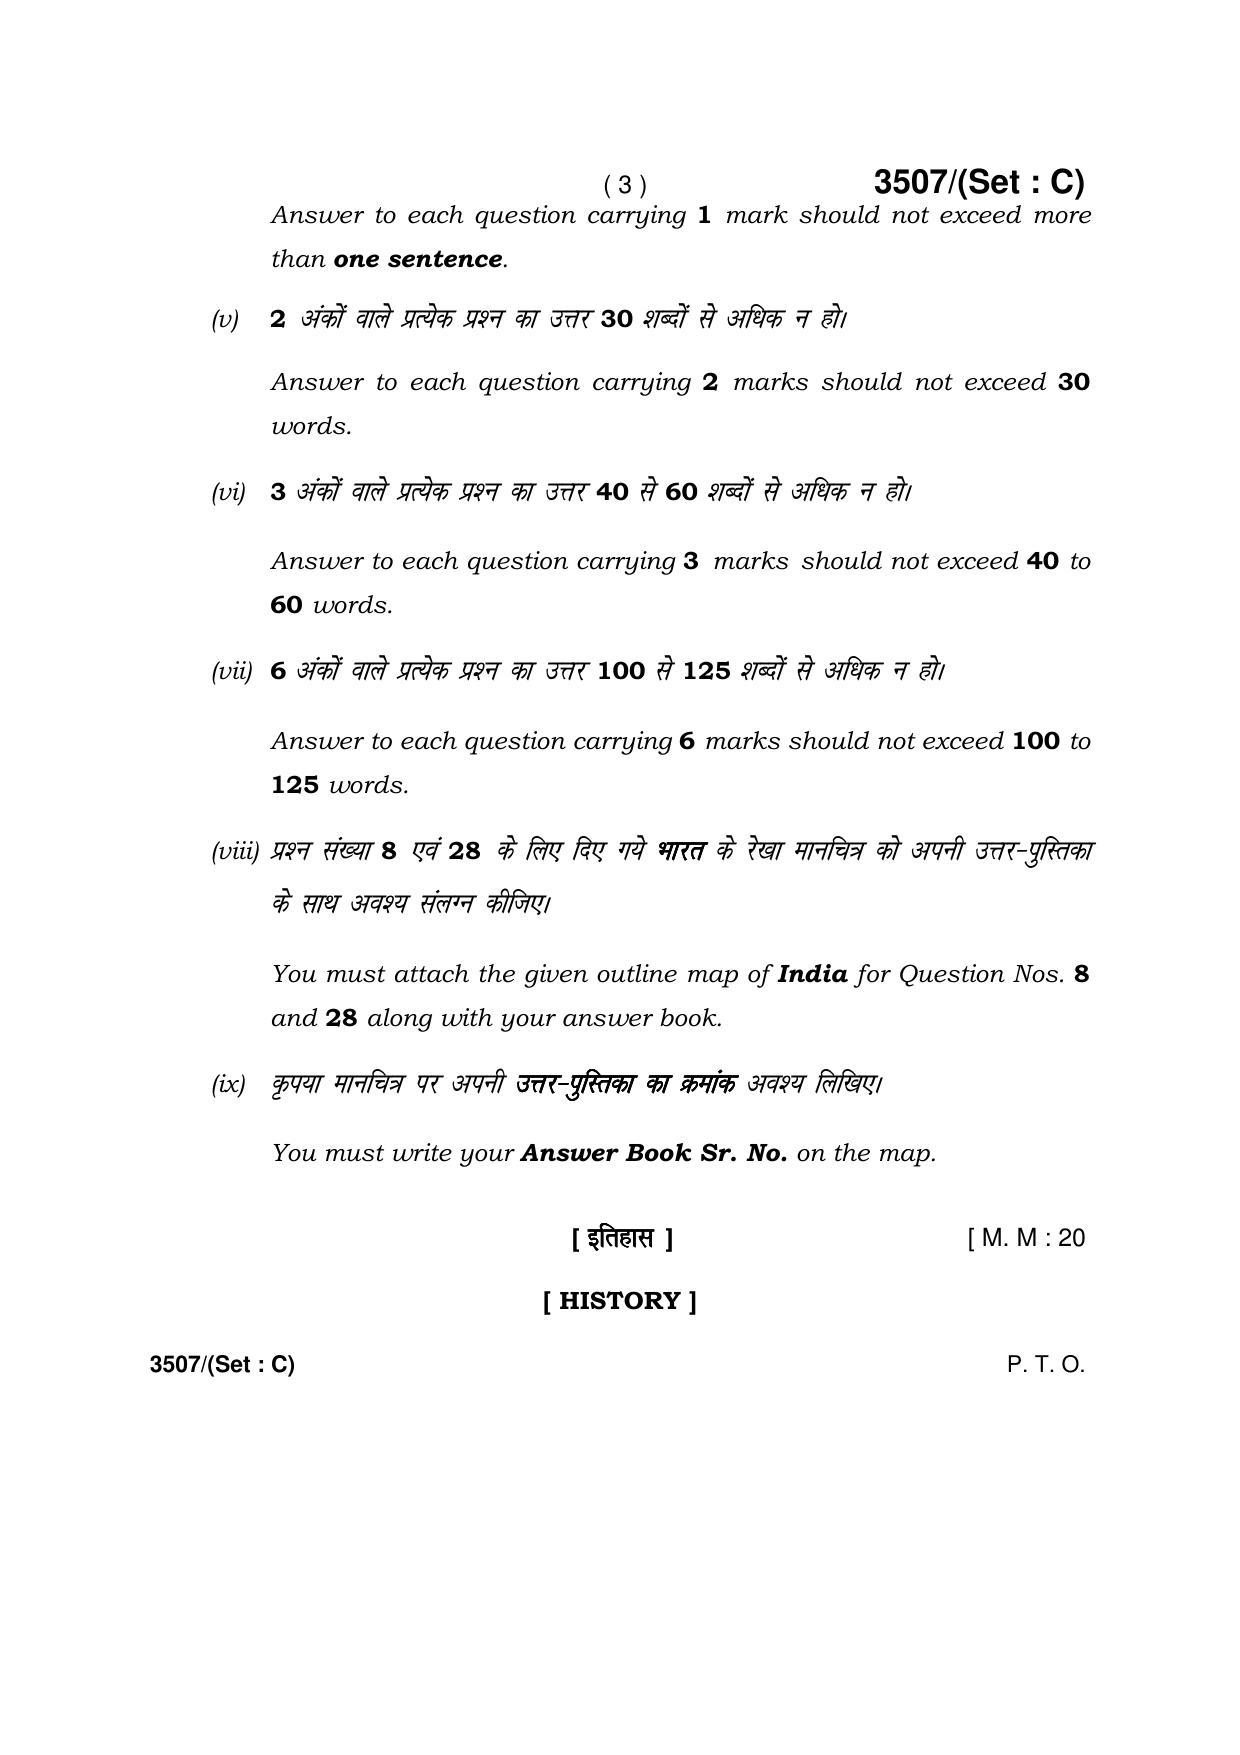  Haryana Board HBSE Class 10 Social Science -C 2018 Question Paper - Page 3